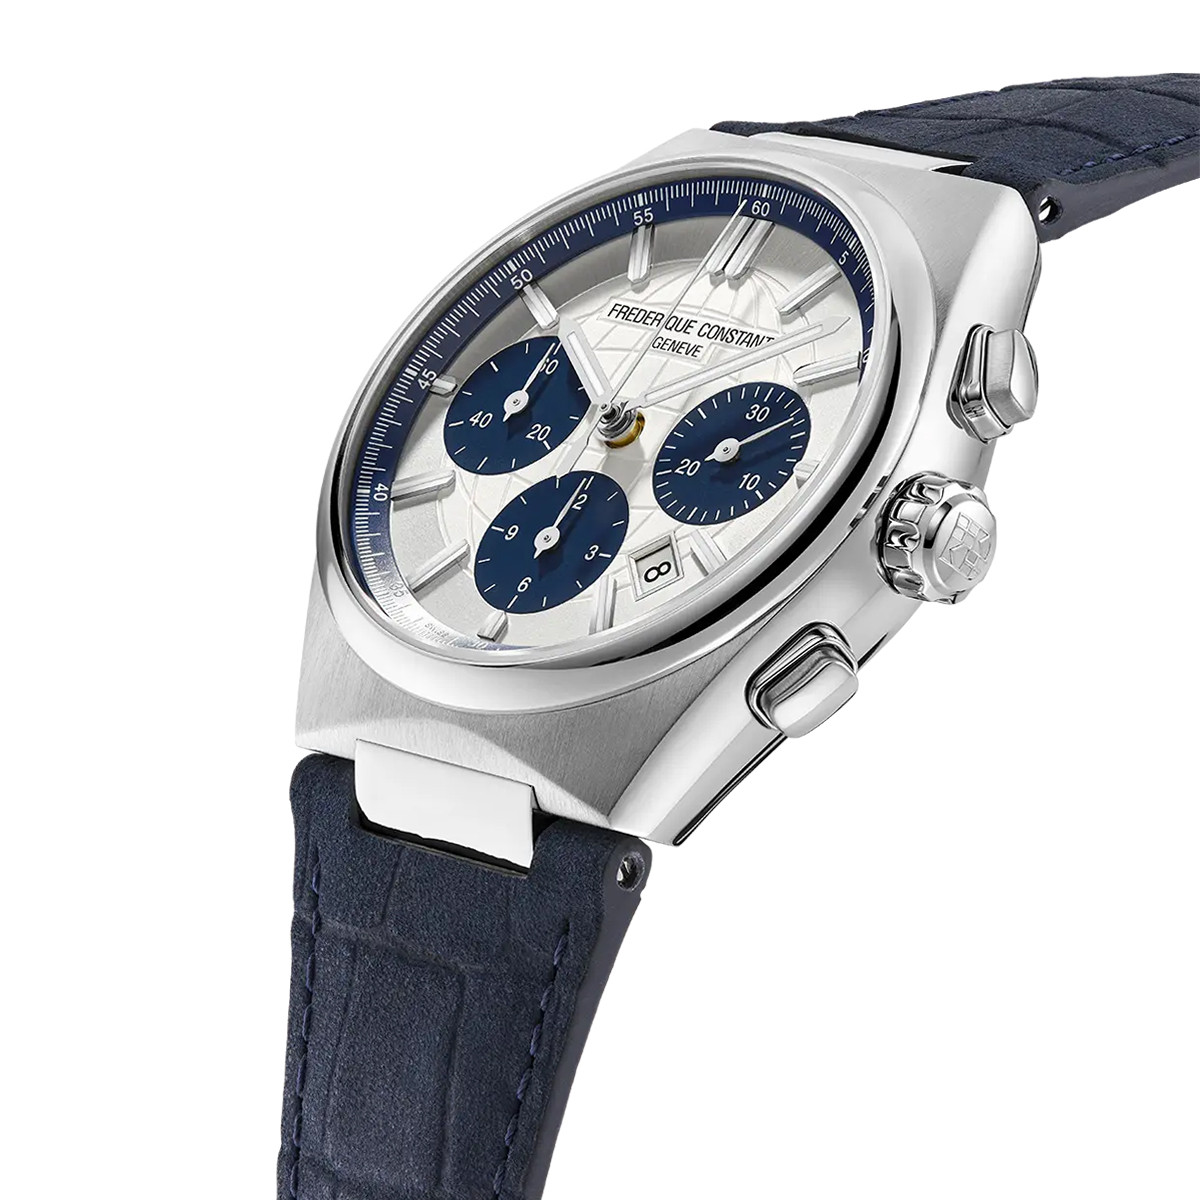 FREDERIQUE CONSTANT HIGHLIFE LIMITED EDITION